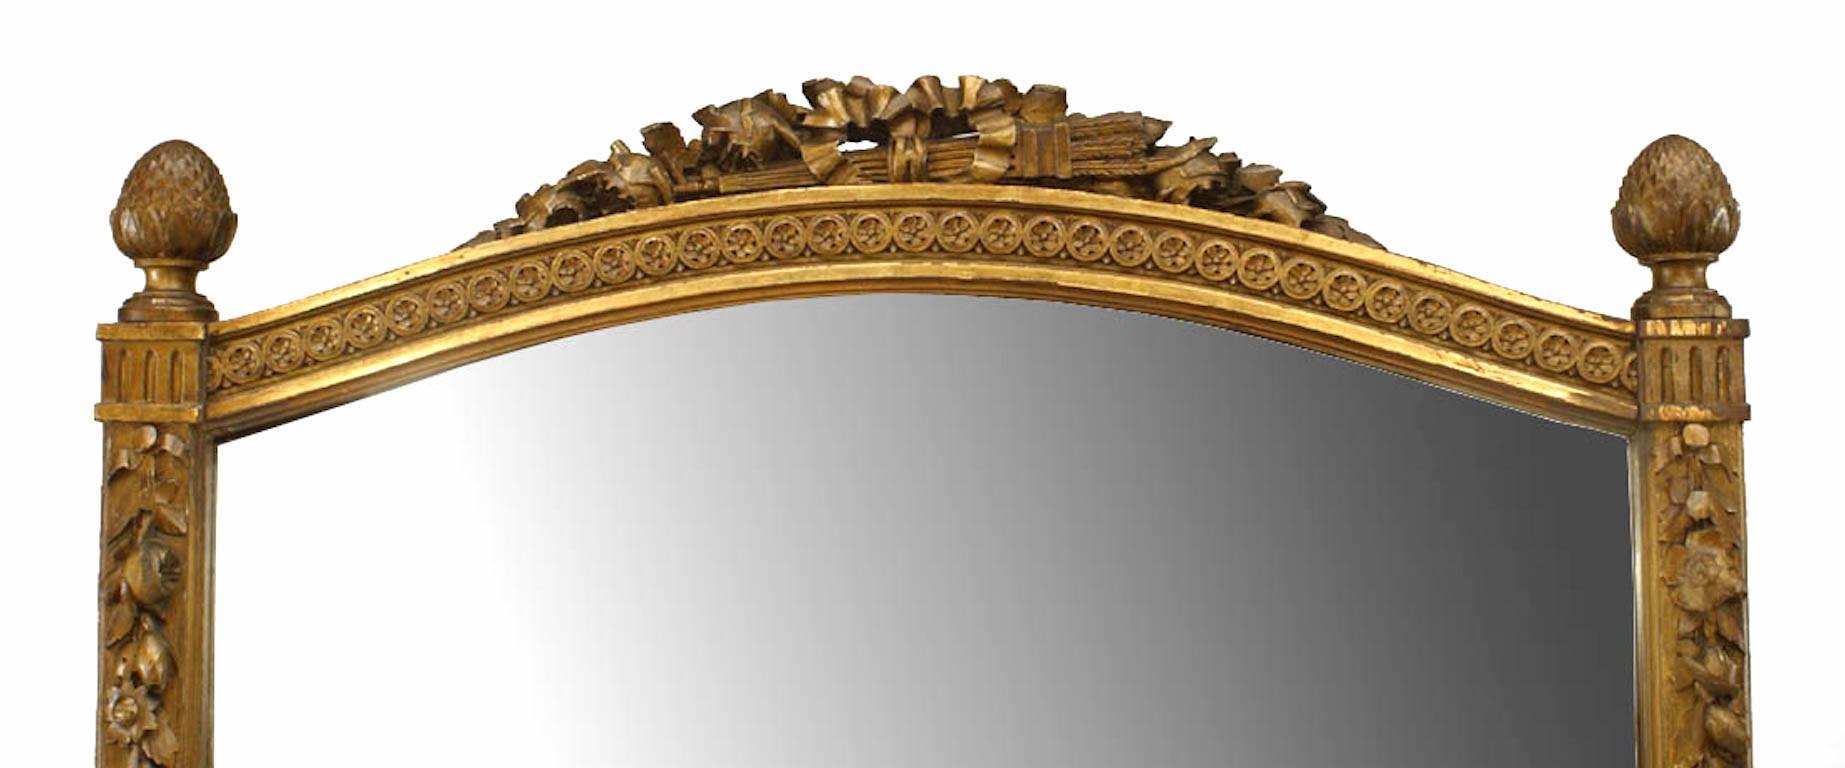 French Louis XVI-style (19th Century) giltwood cheval mirror with finials and a carved crest.
